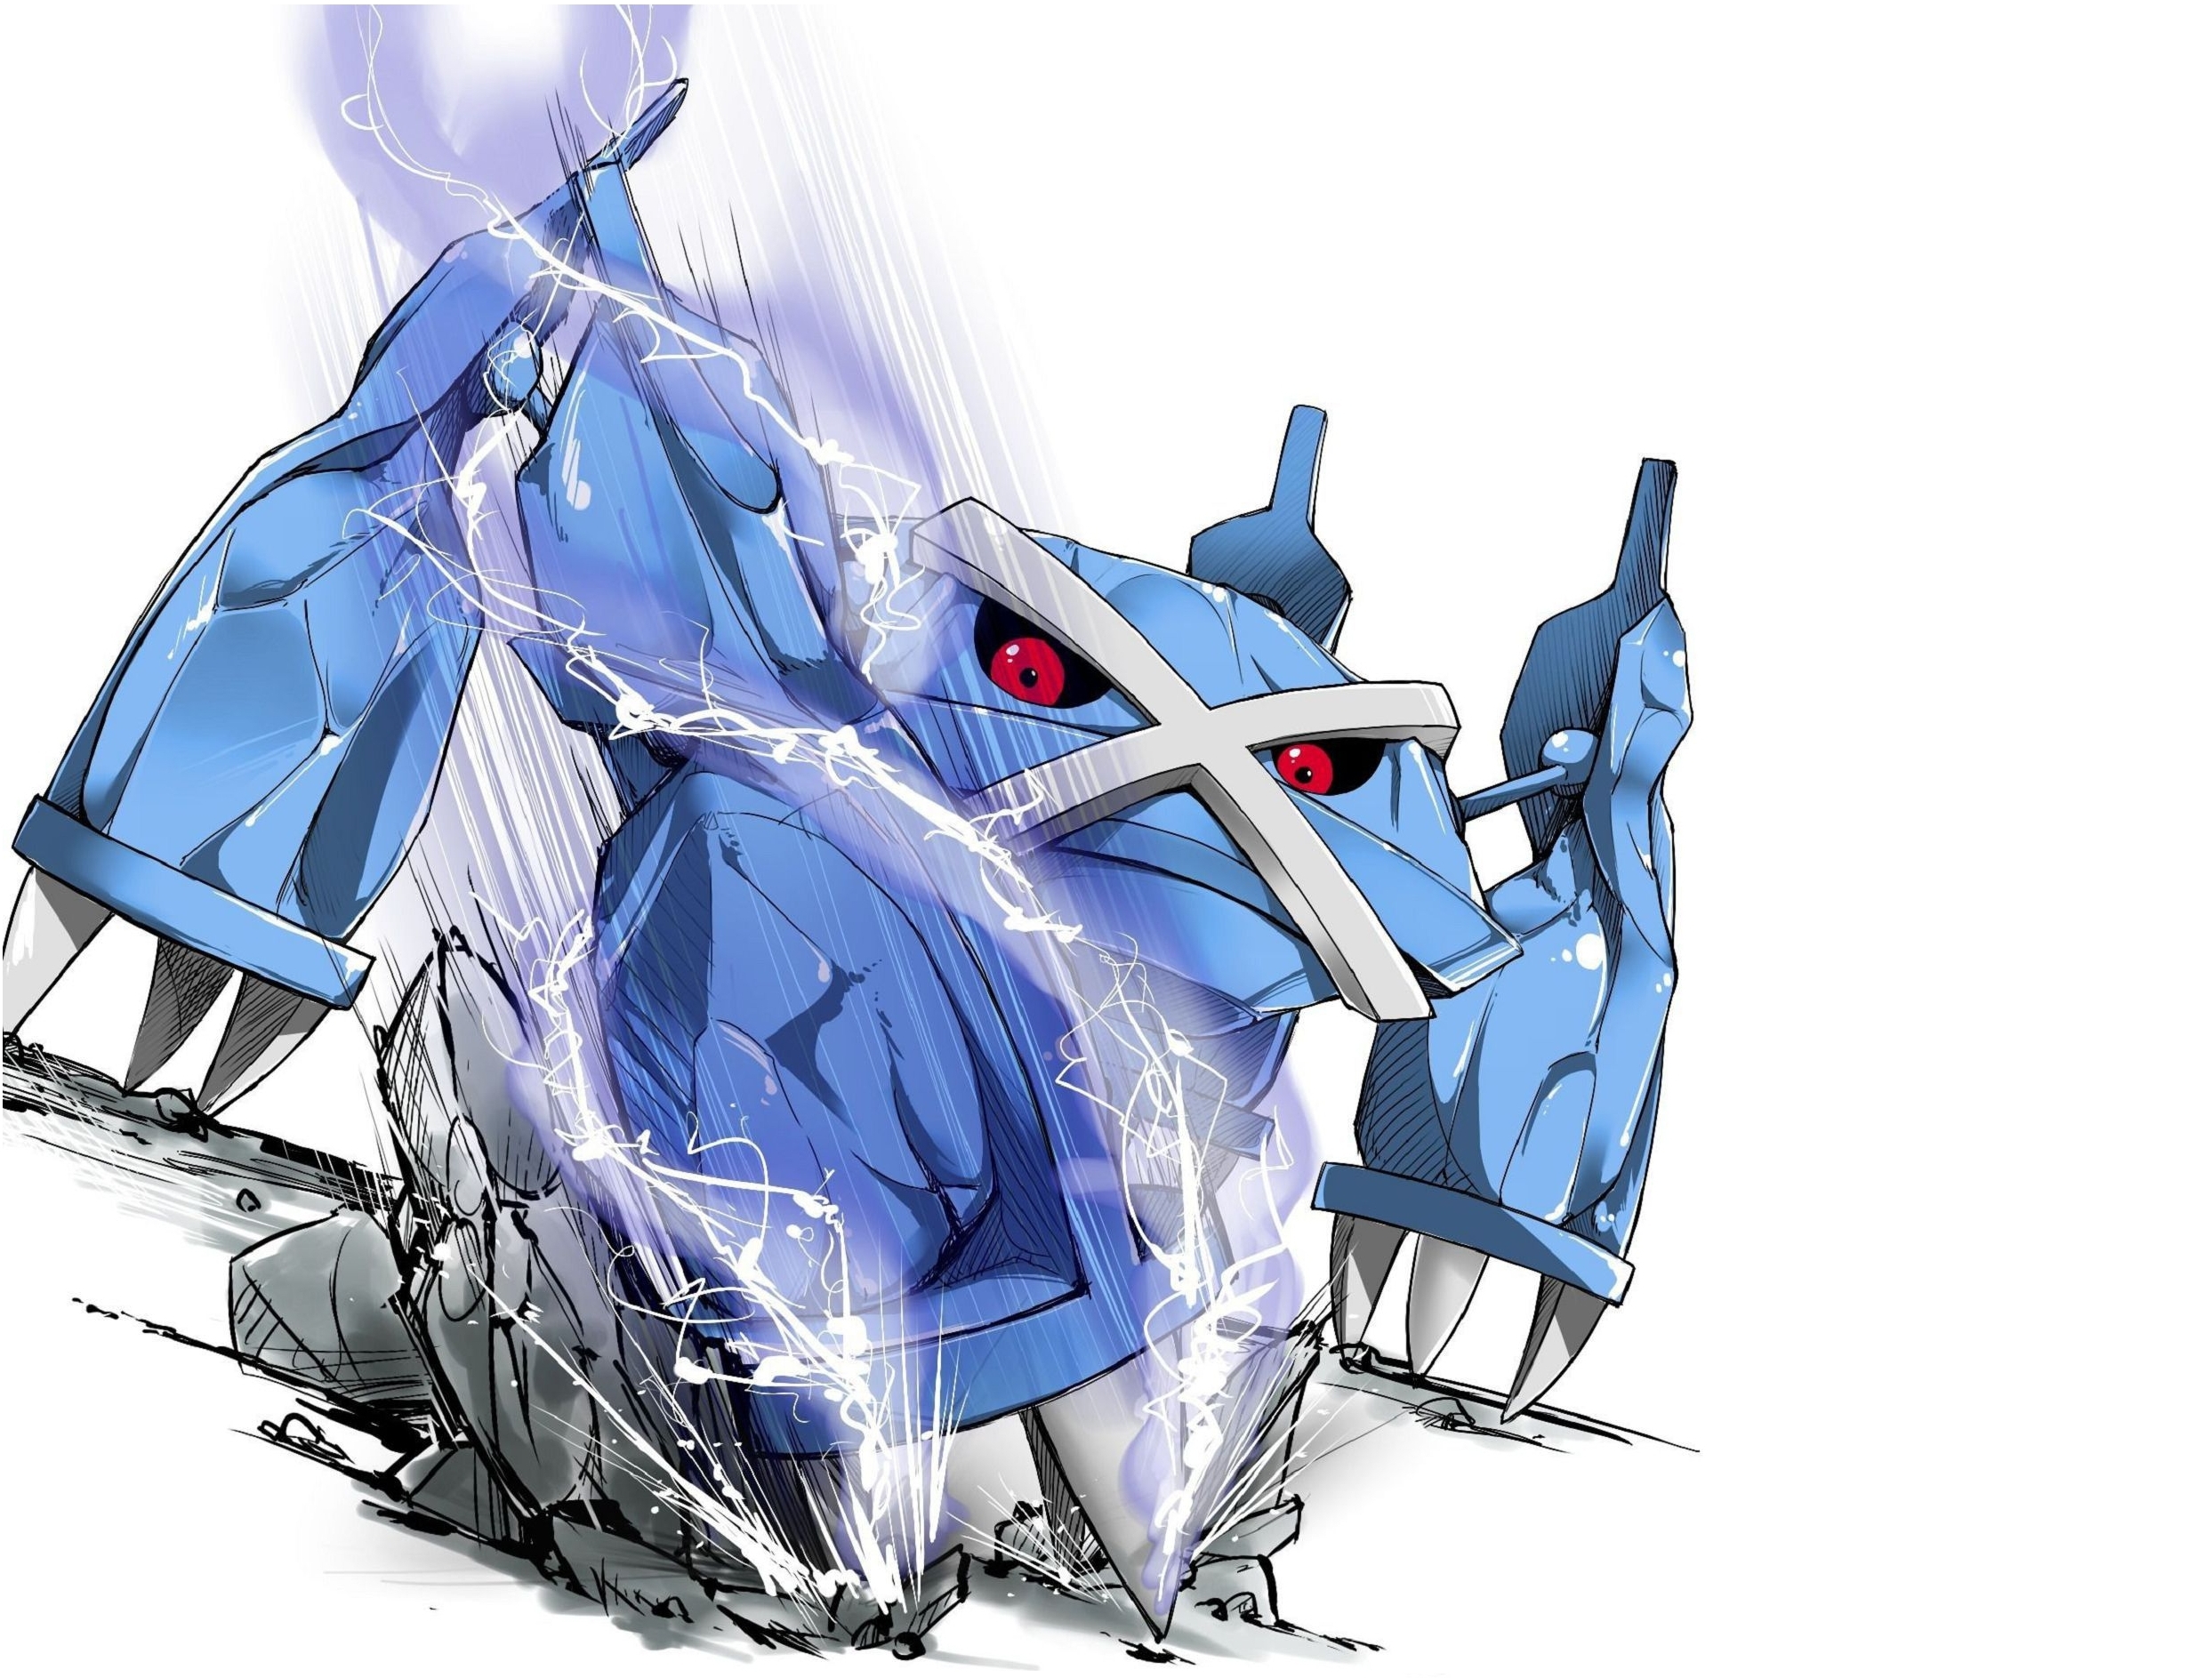 Bringing Back Metagross And Lapras Metagross And Lapras.